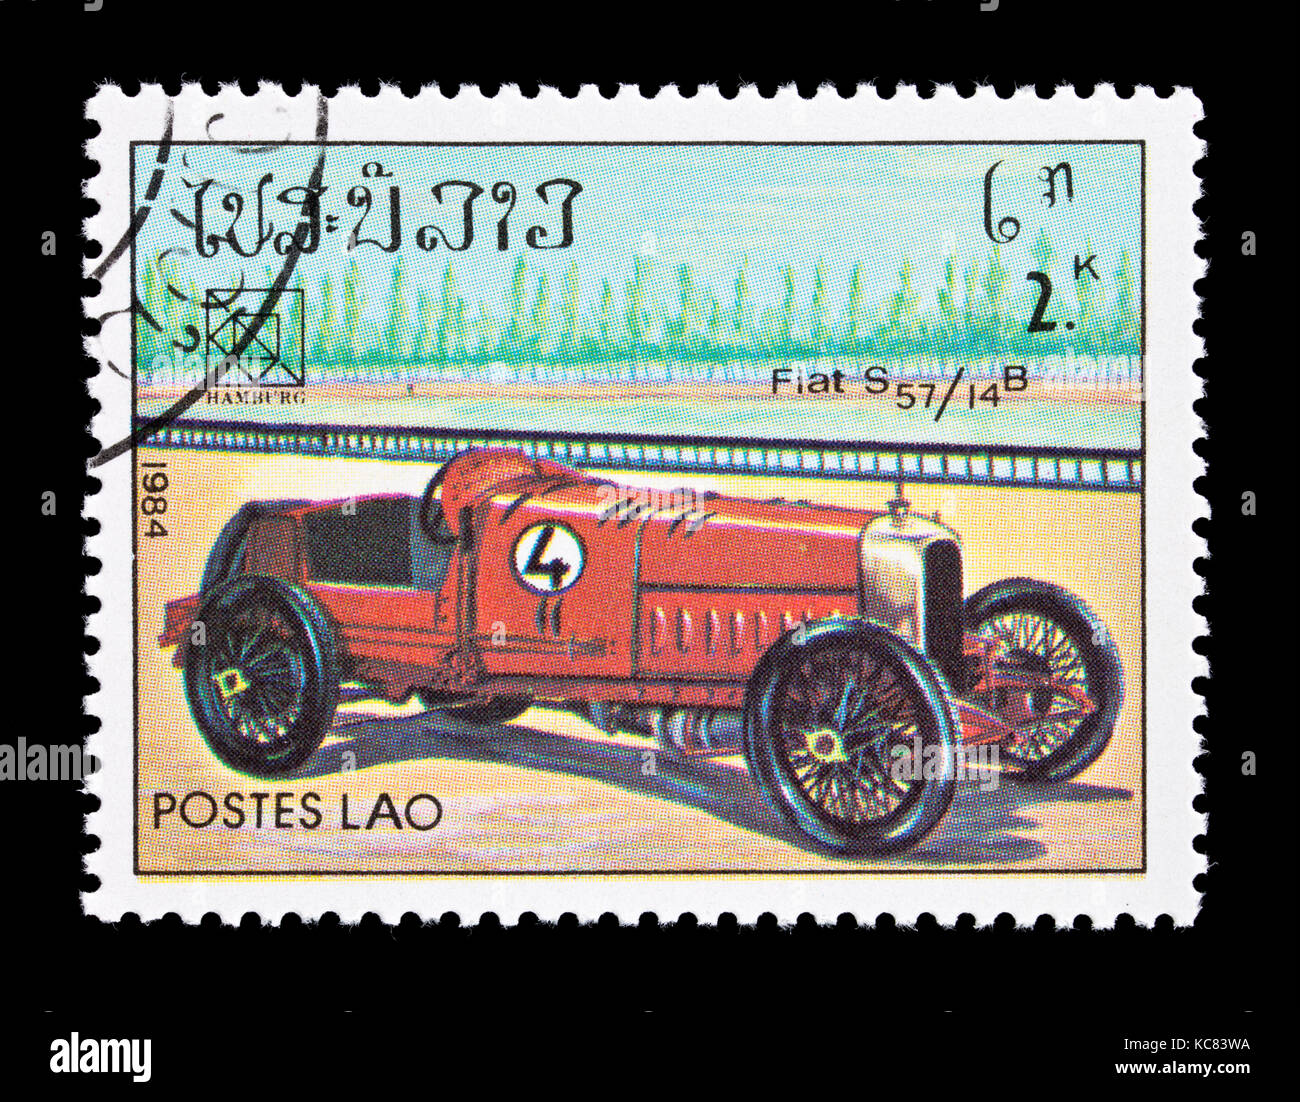 Postage stamp from Laos depicting a Fiat S57/14B Stock Photo